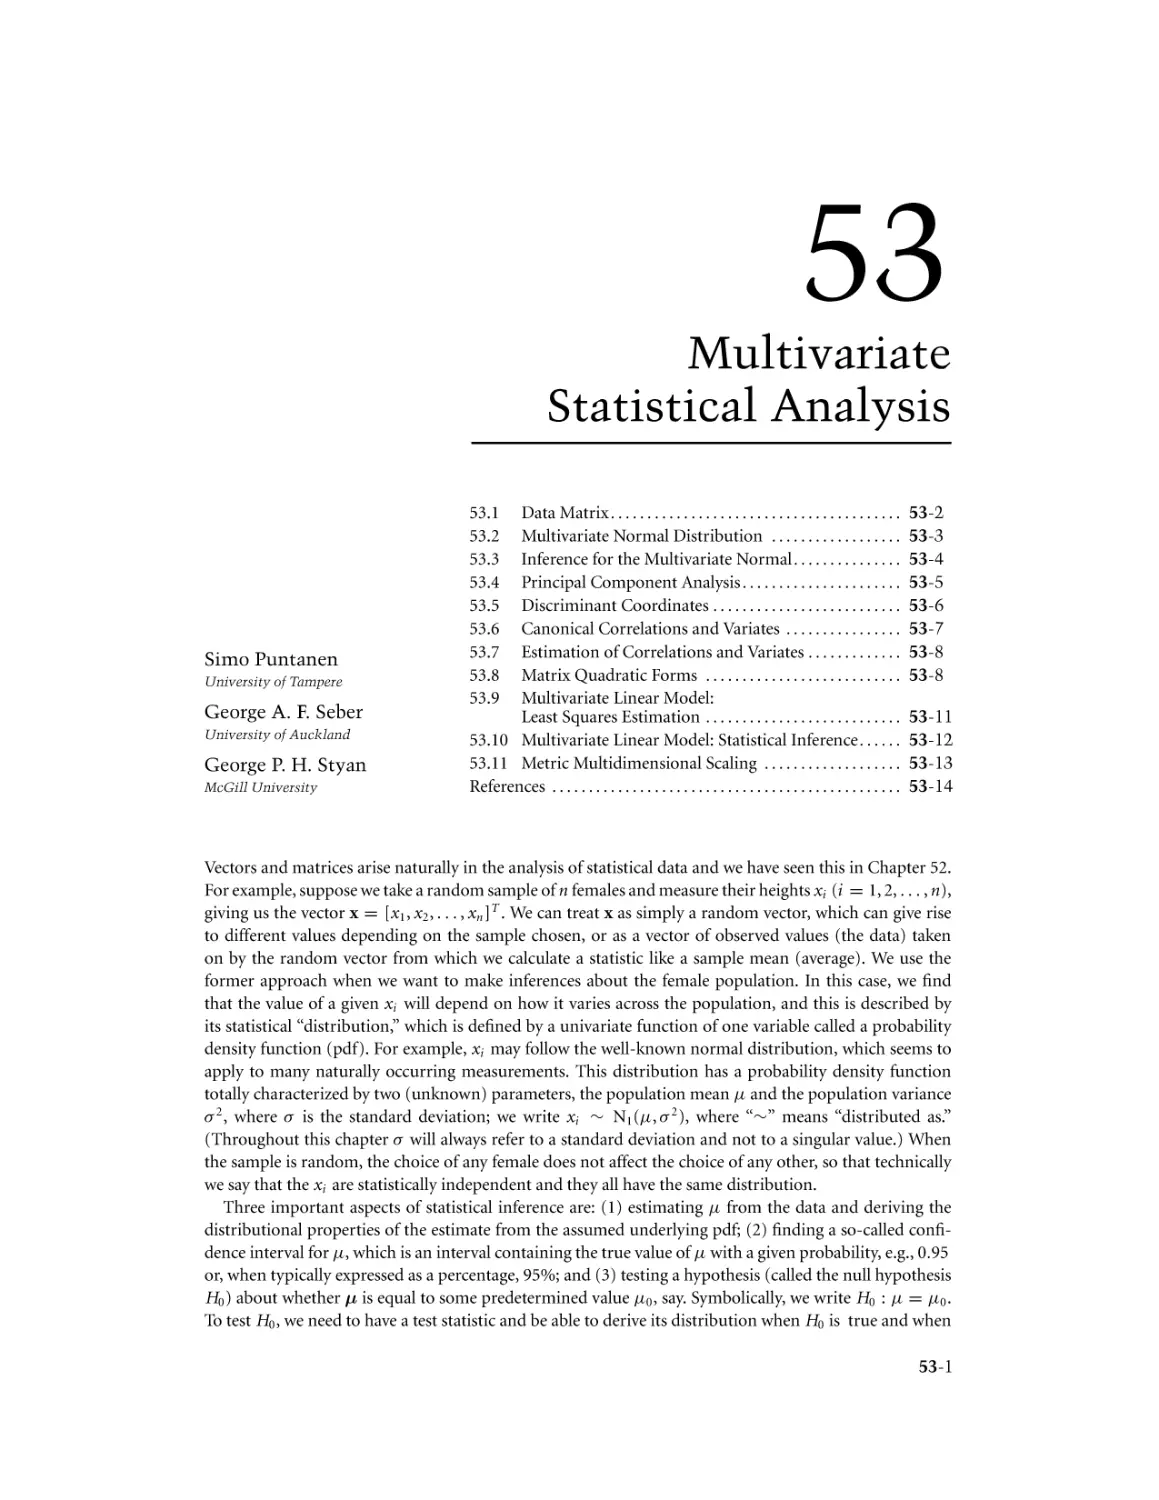 Chapter 53. Multivariate Statistical Analysis